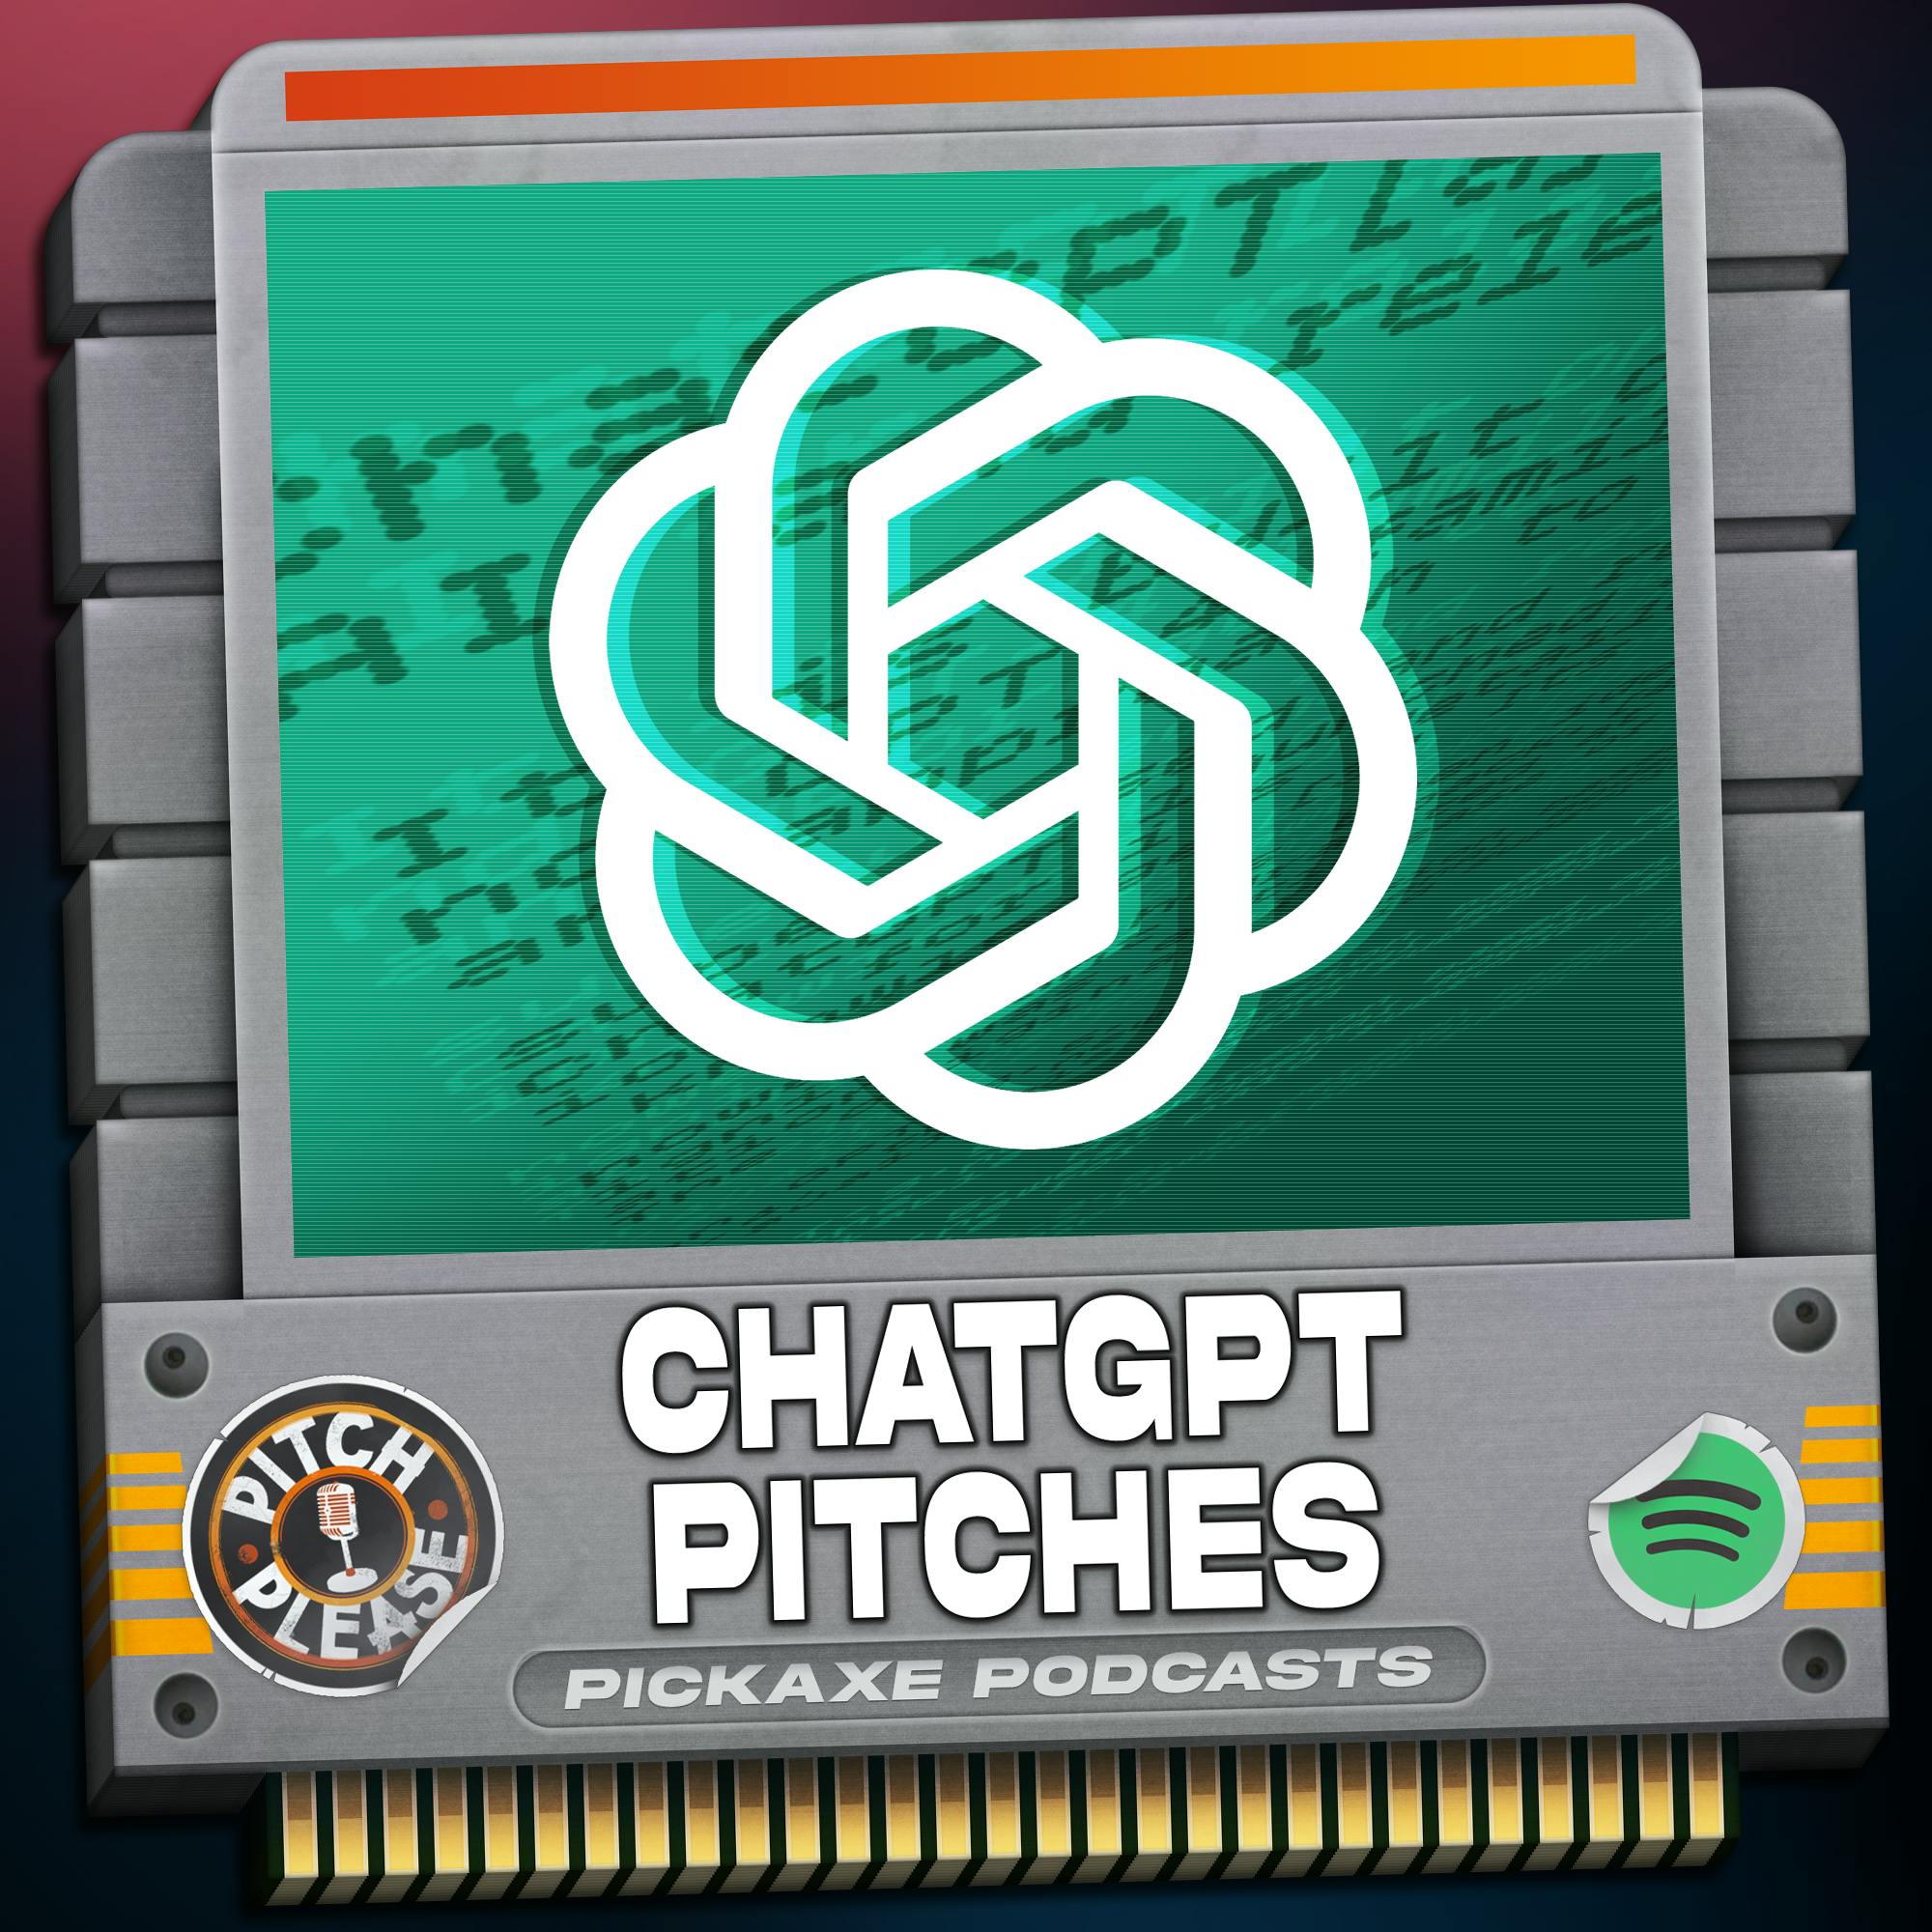 Pitch, Please - ChatGPT Pitches